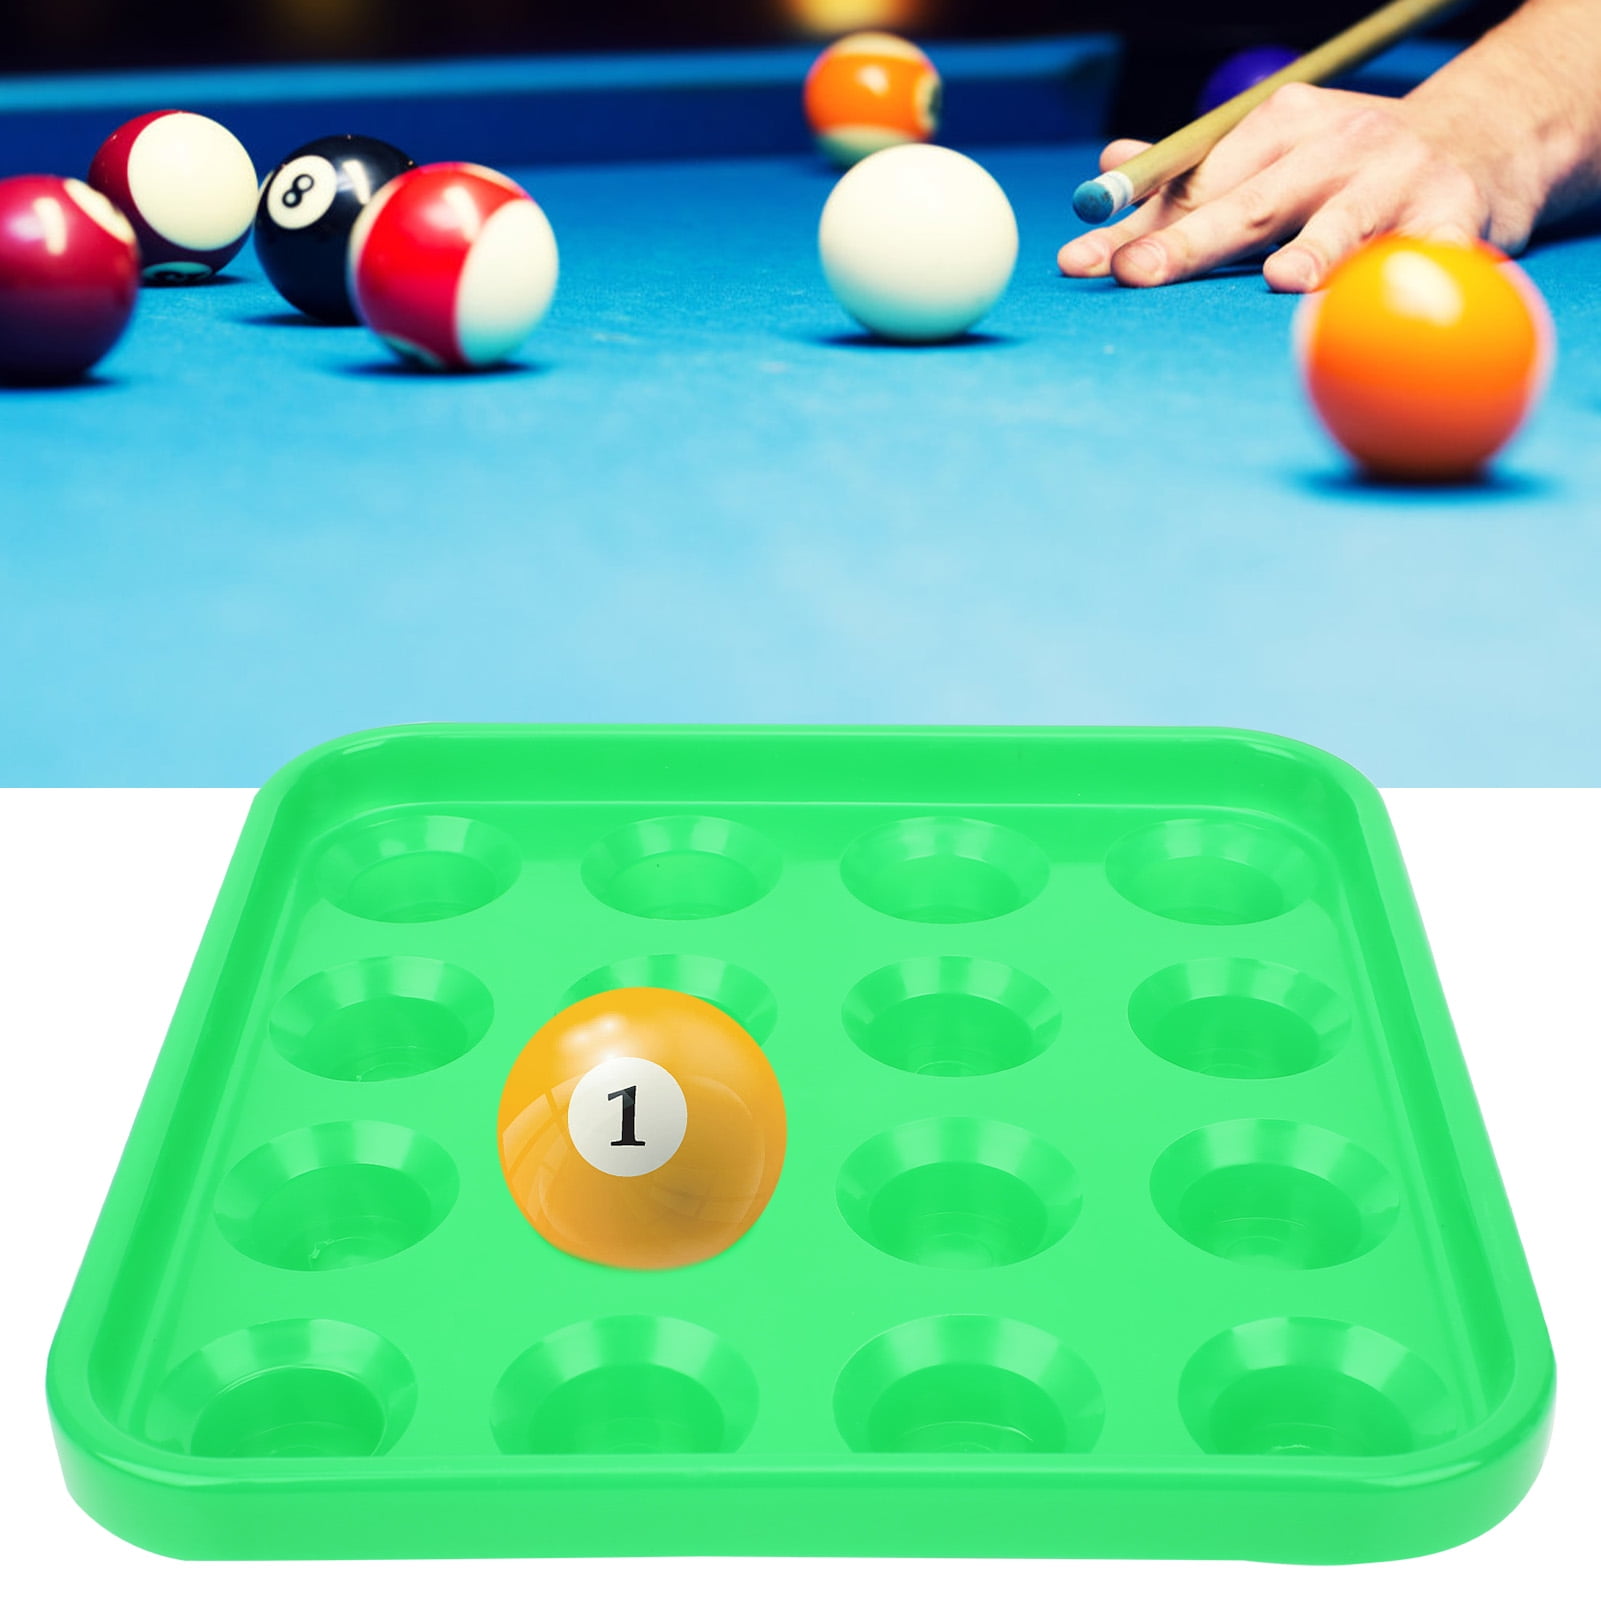 New Durable Plastic Snooker or Pool Ball Tray Holds 16 Balls Green 